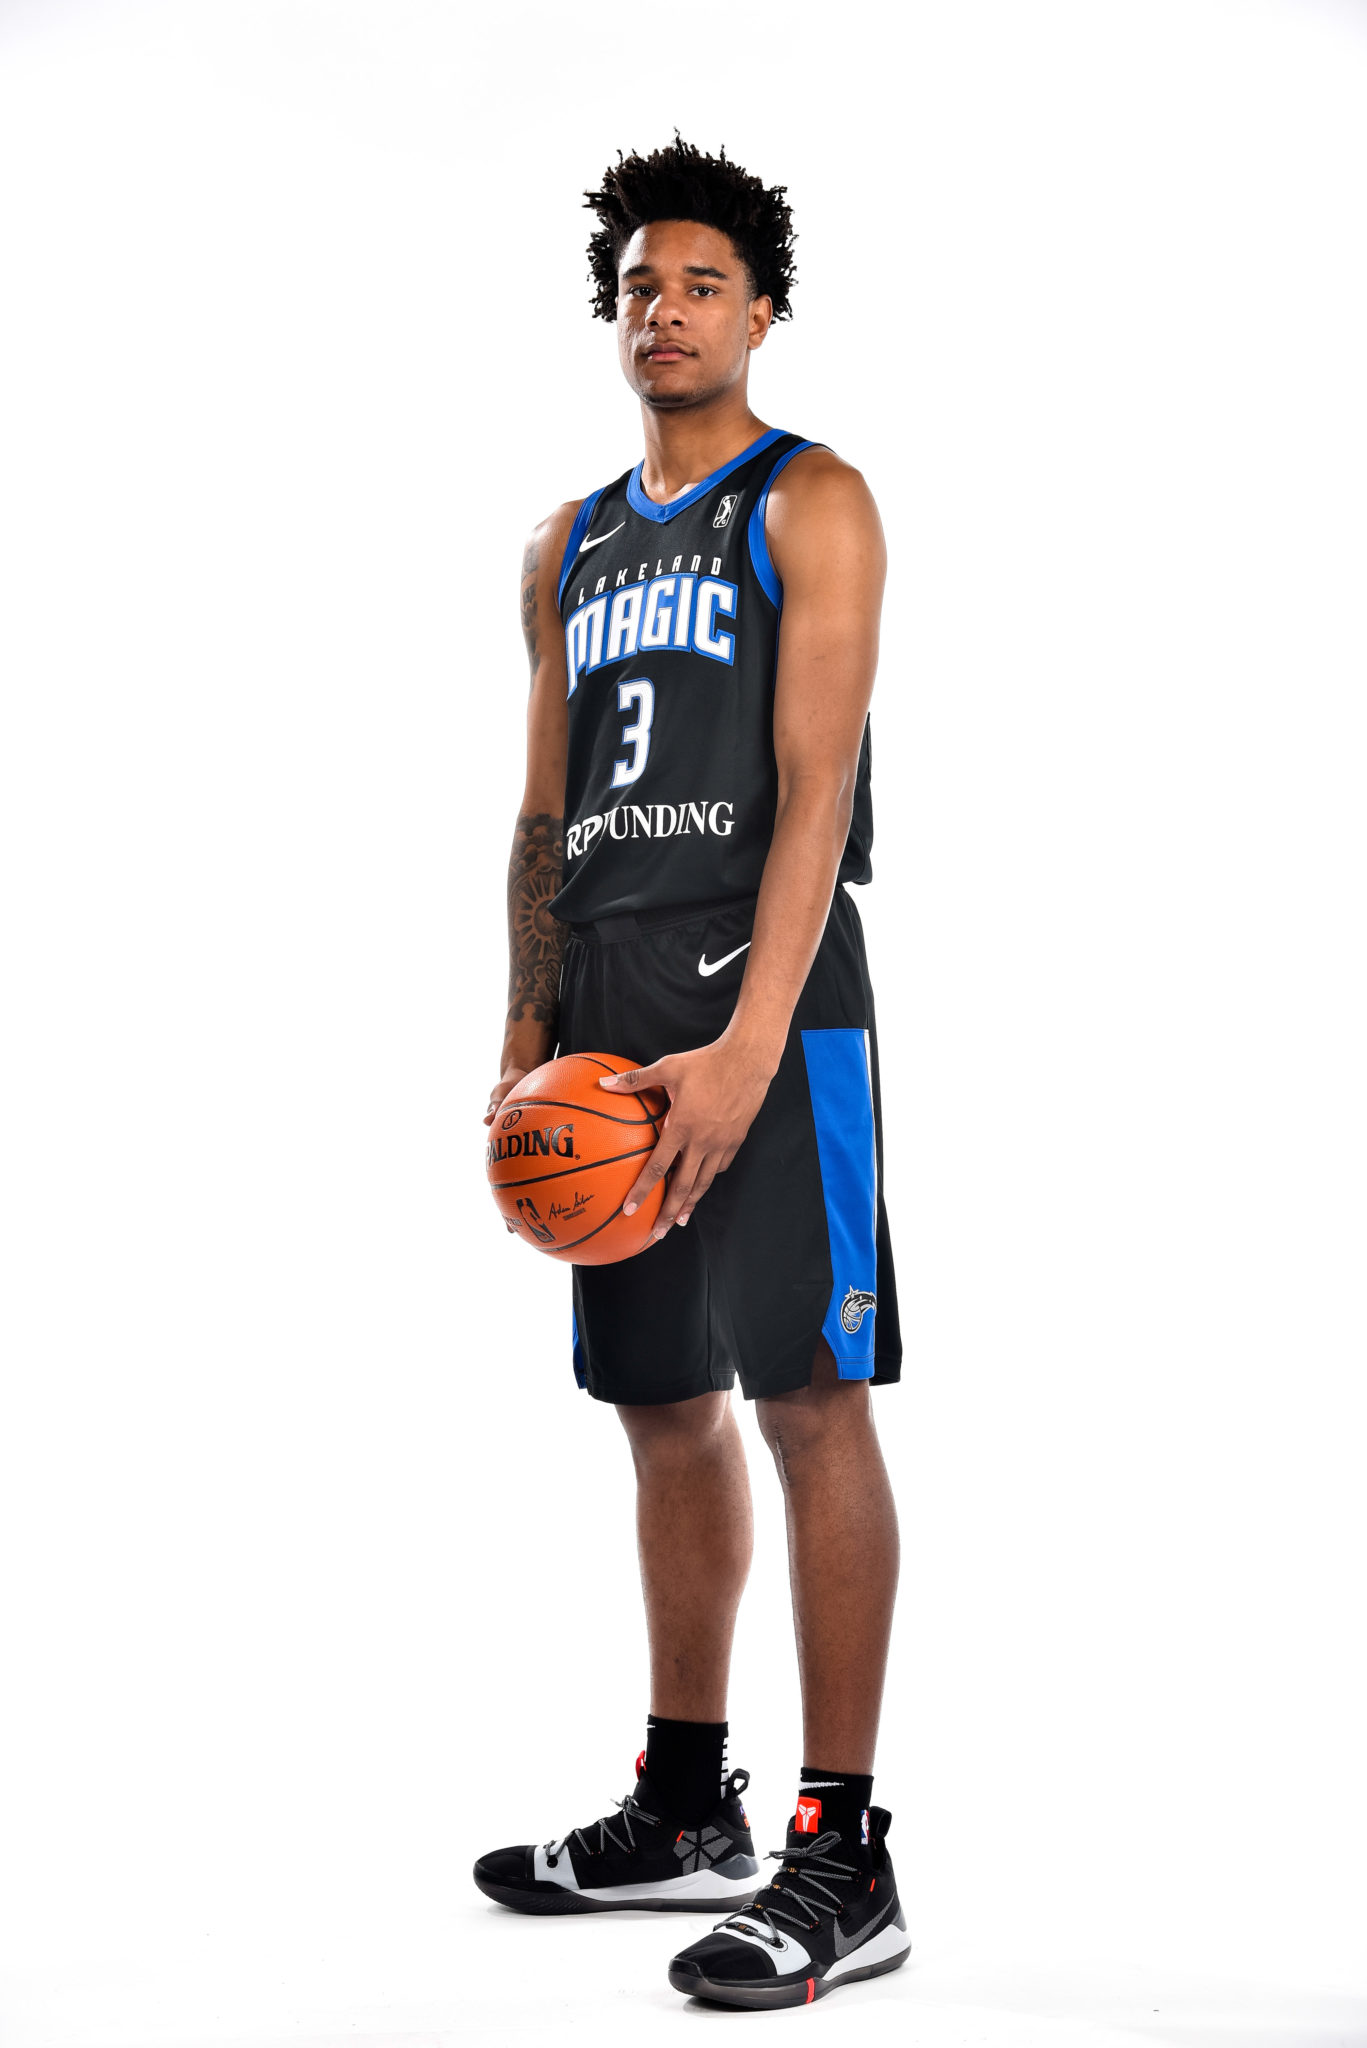 ORLANDO, FL - NOVEMBER 4: Chuma Okeke #3 of the Lakeland Magic pose for a portrait during G League Media Day on November 4, 2019 at HAUS 820 in Lakeland, Florida. NOTE TO USER: User expressly acknowledges and agrees that, by downloading and or using this photograph, User is consenting to the terms and conditions of the Getty Images License Agreement. Mandatory Copyright Notice: Copyright 2019 NBAE (Photo by Fernando Medina/NBAE via Getty Images)